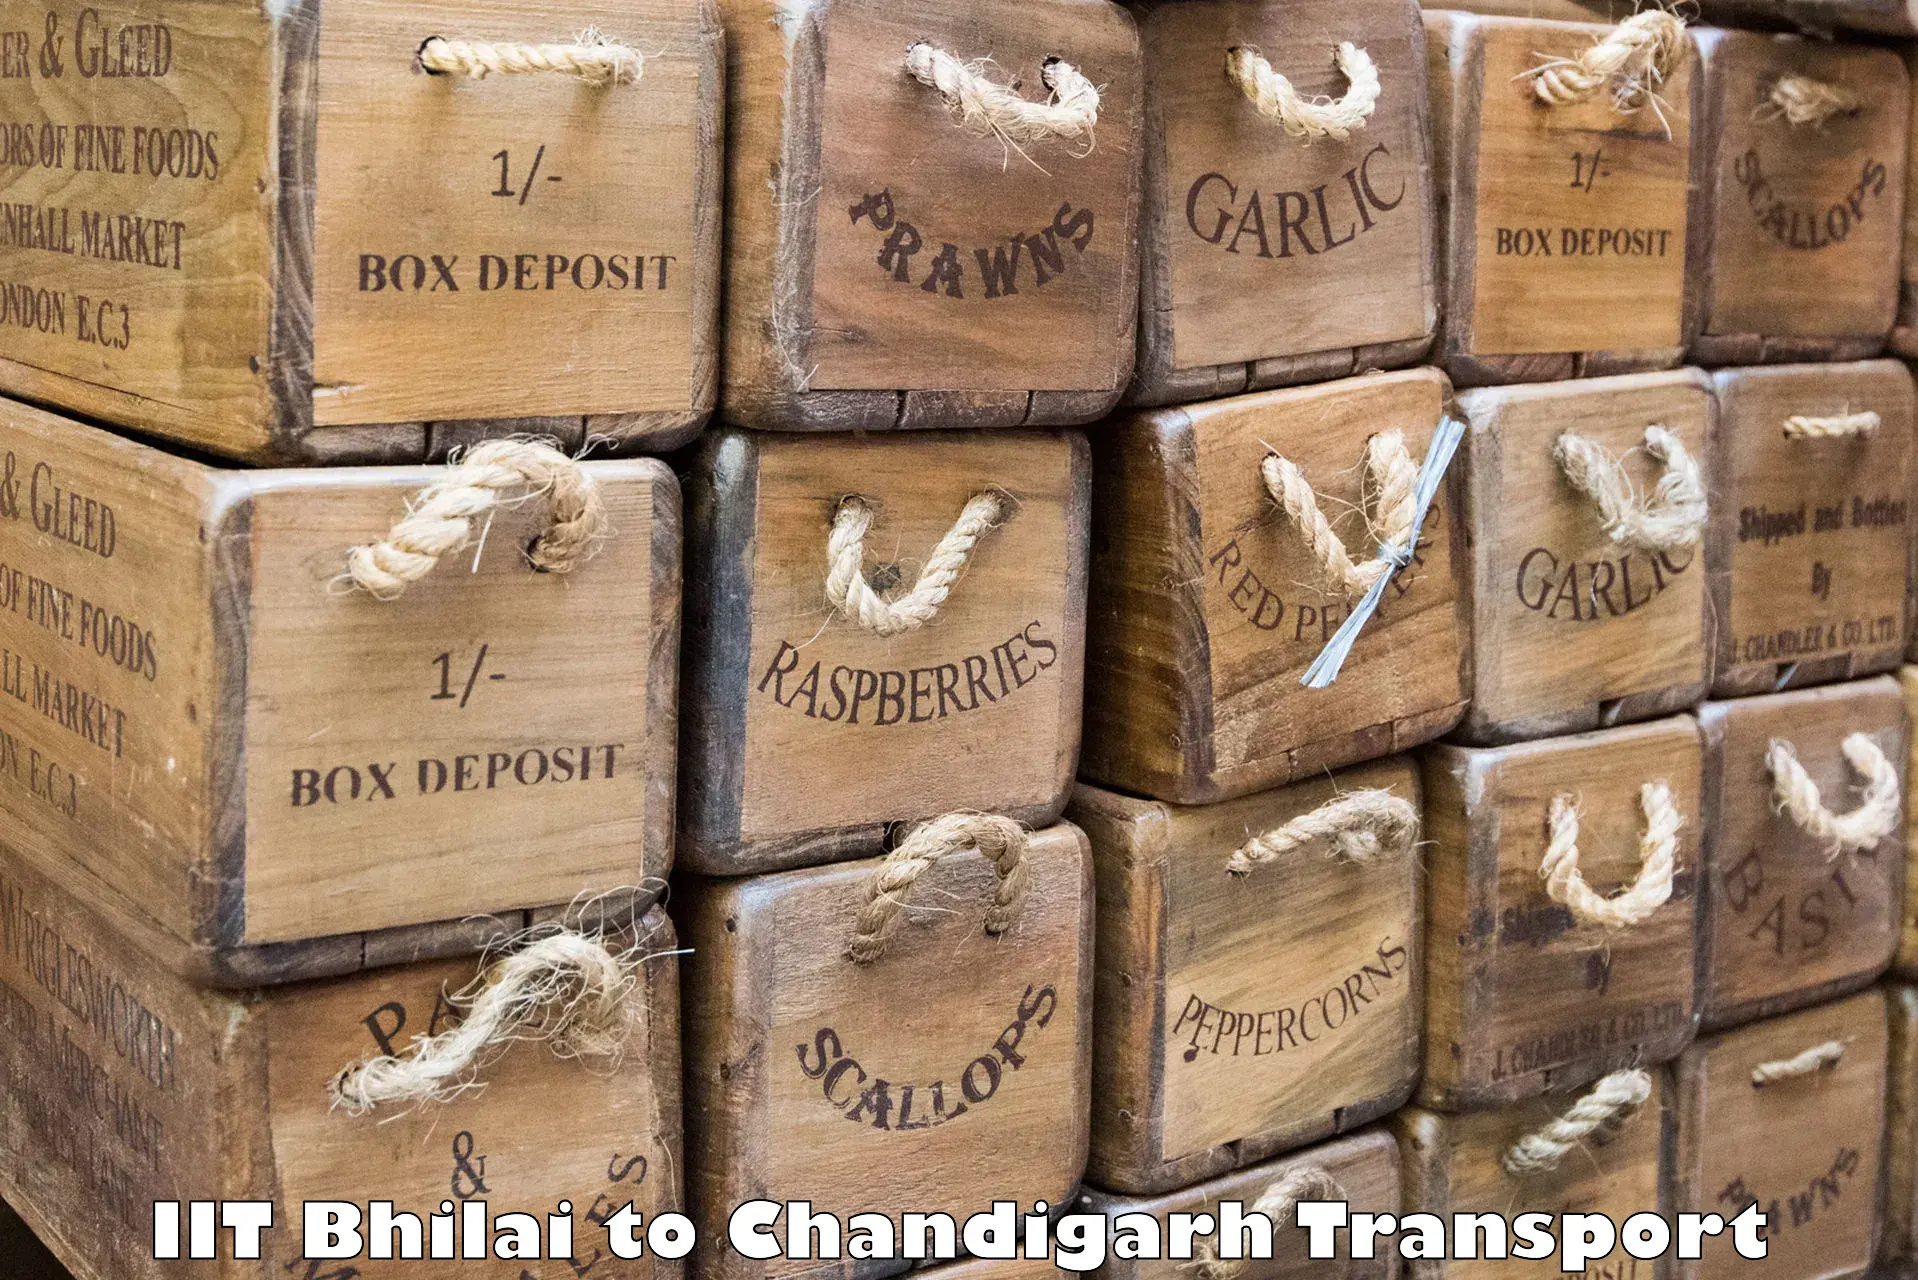 Goods delivery service IIT Bhilai to Chandigarh